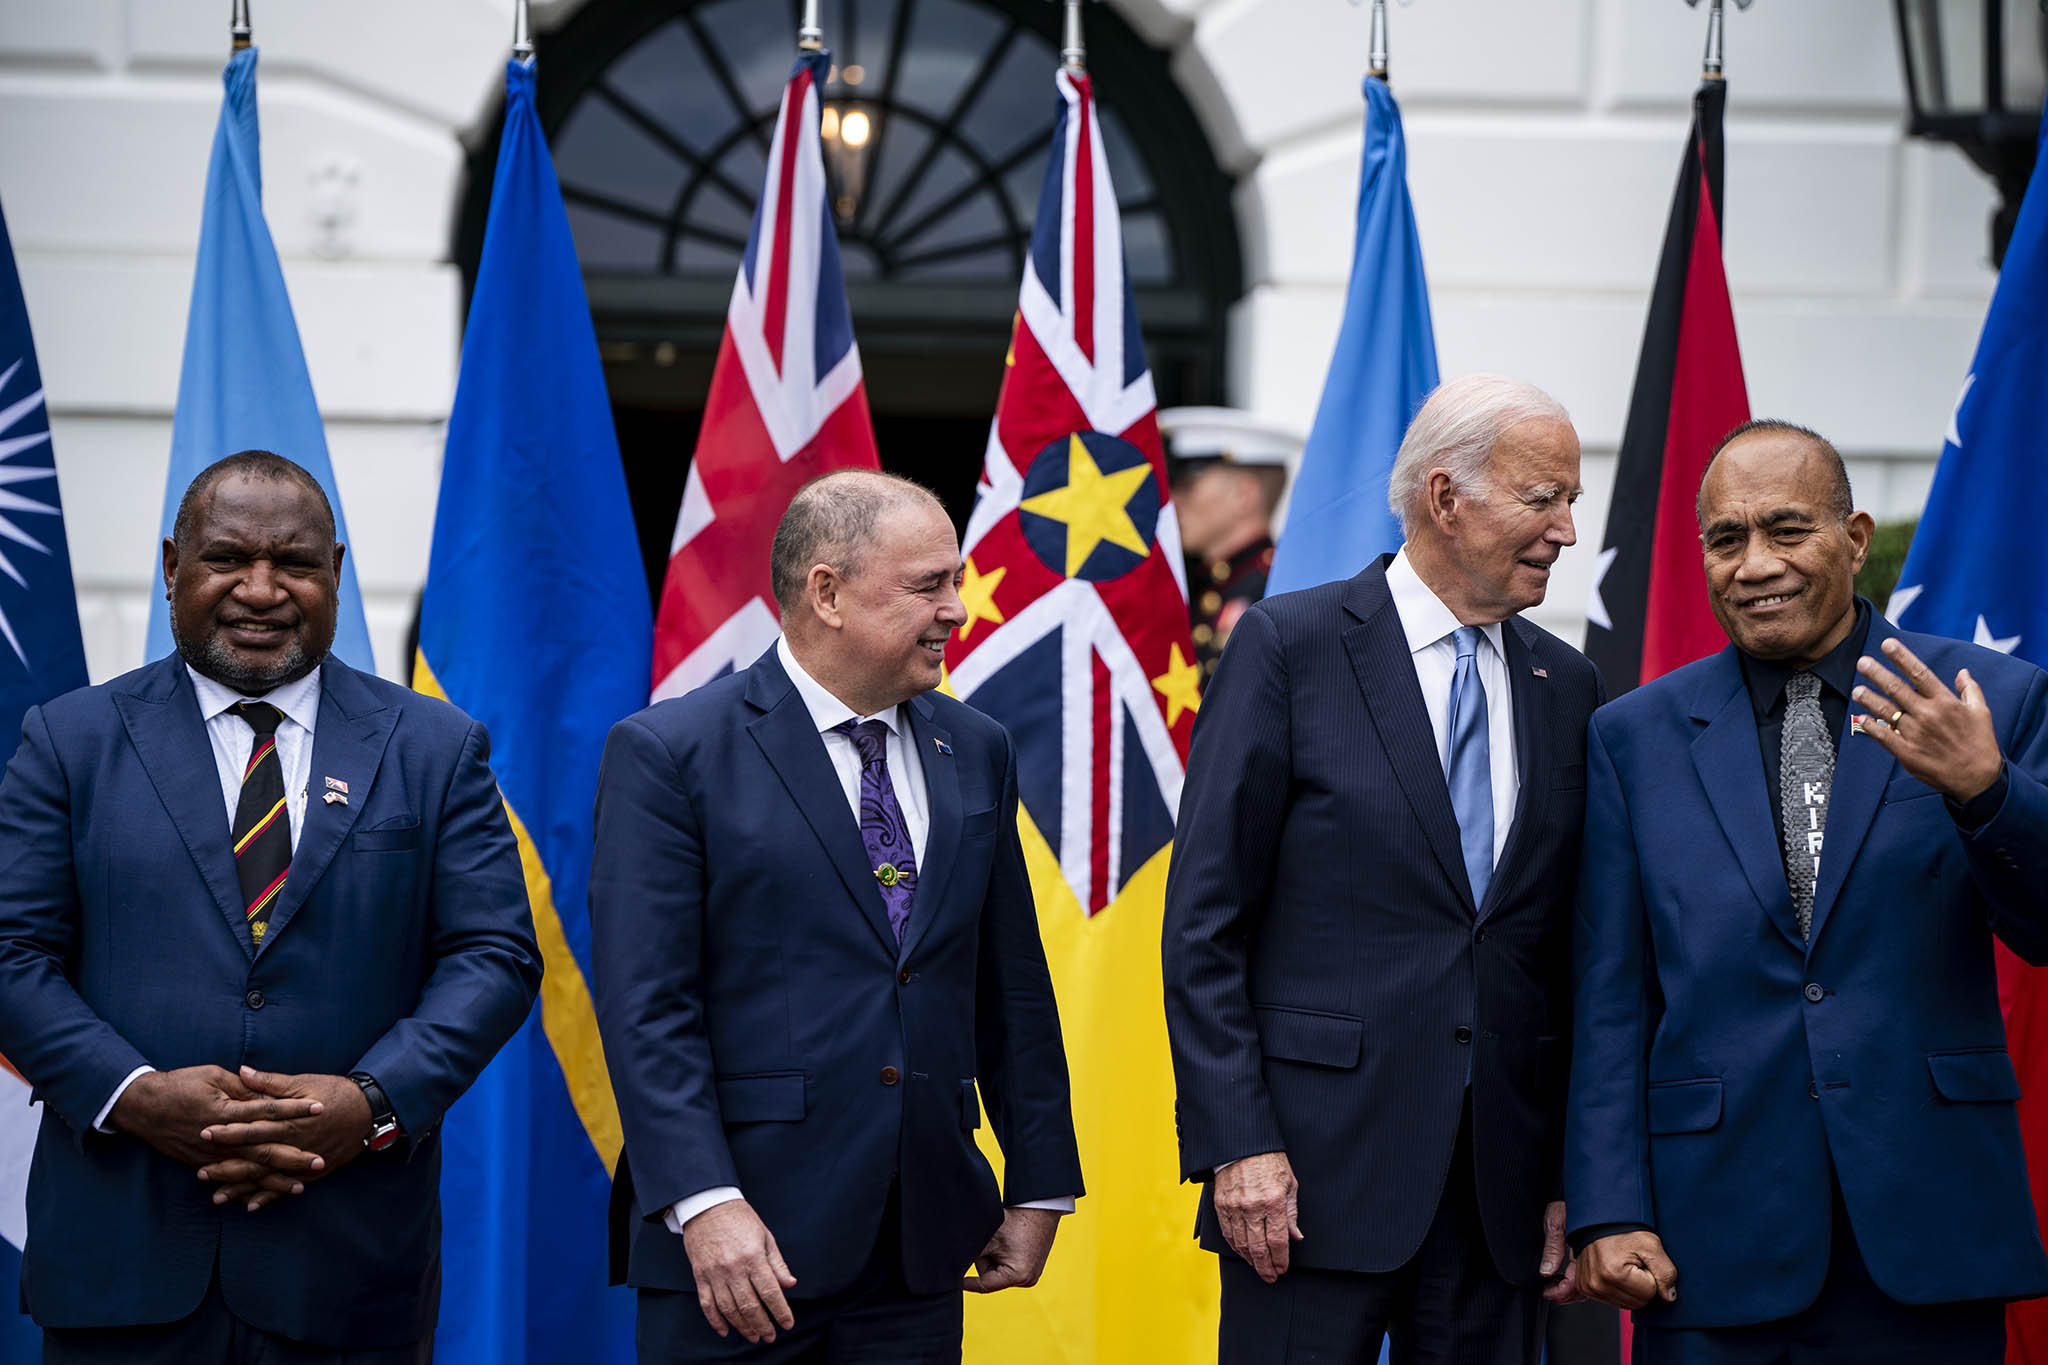 U.S. President Joe Biden met Pacific Island leaders, including (from left) James Marape, Mark Brown and Taneti Maamau, of Papua New Guinea, Cook Islands and Kiribati, respectively, in Washington on September 25, 2023. (Haiyun Jiang/The New York Times)